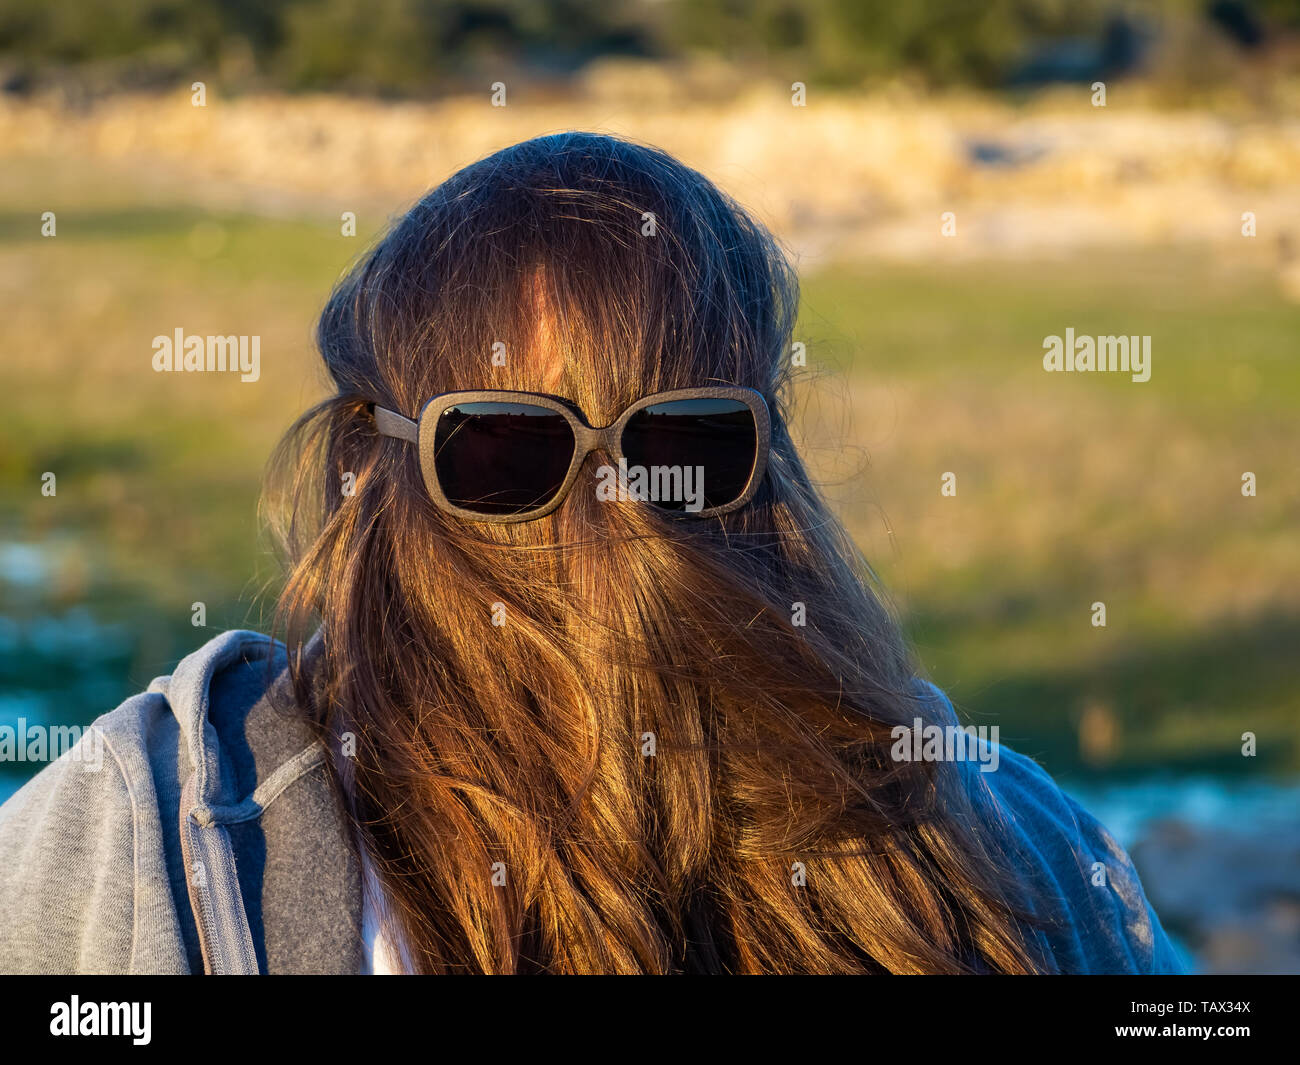 A curvy woman making funny gestures with hair in front of his face and sunglasses Stock Photo